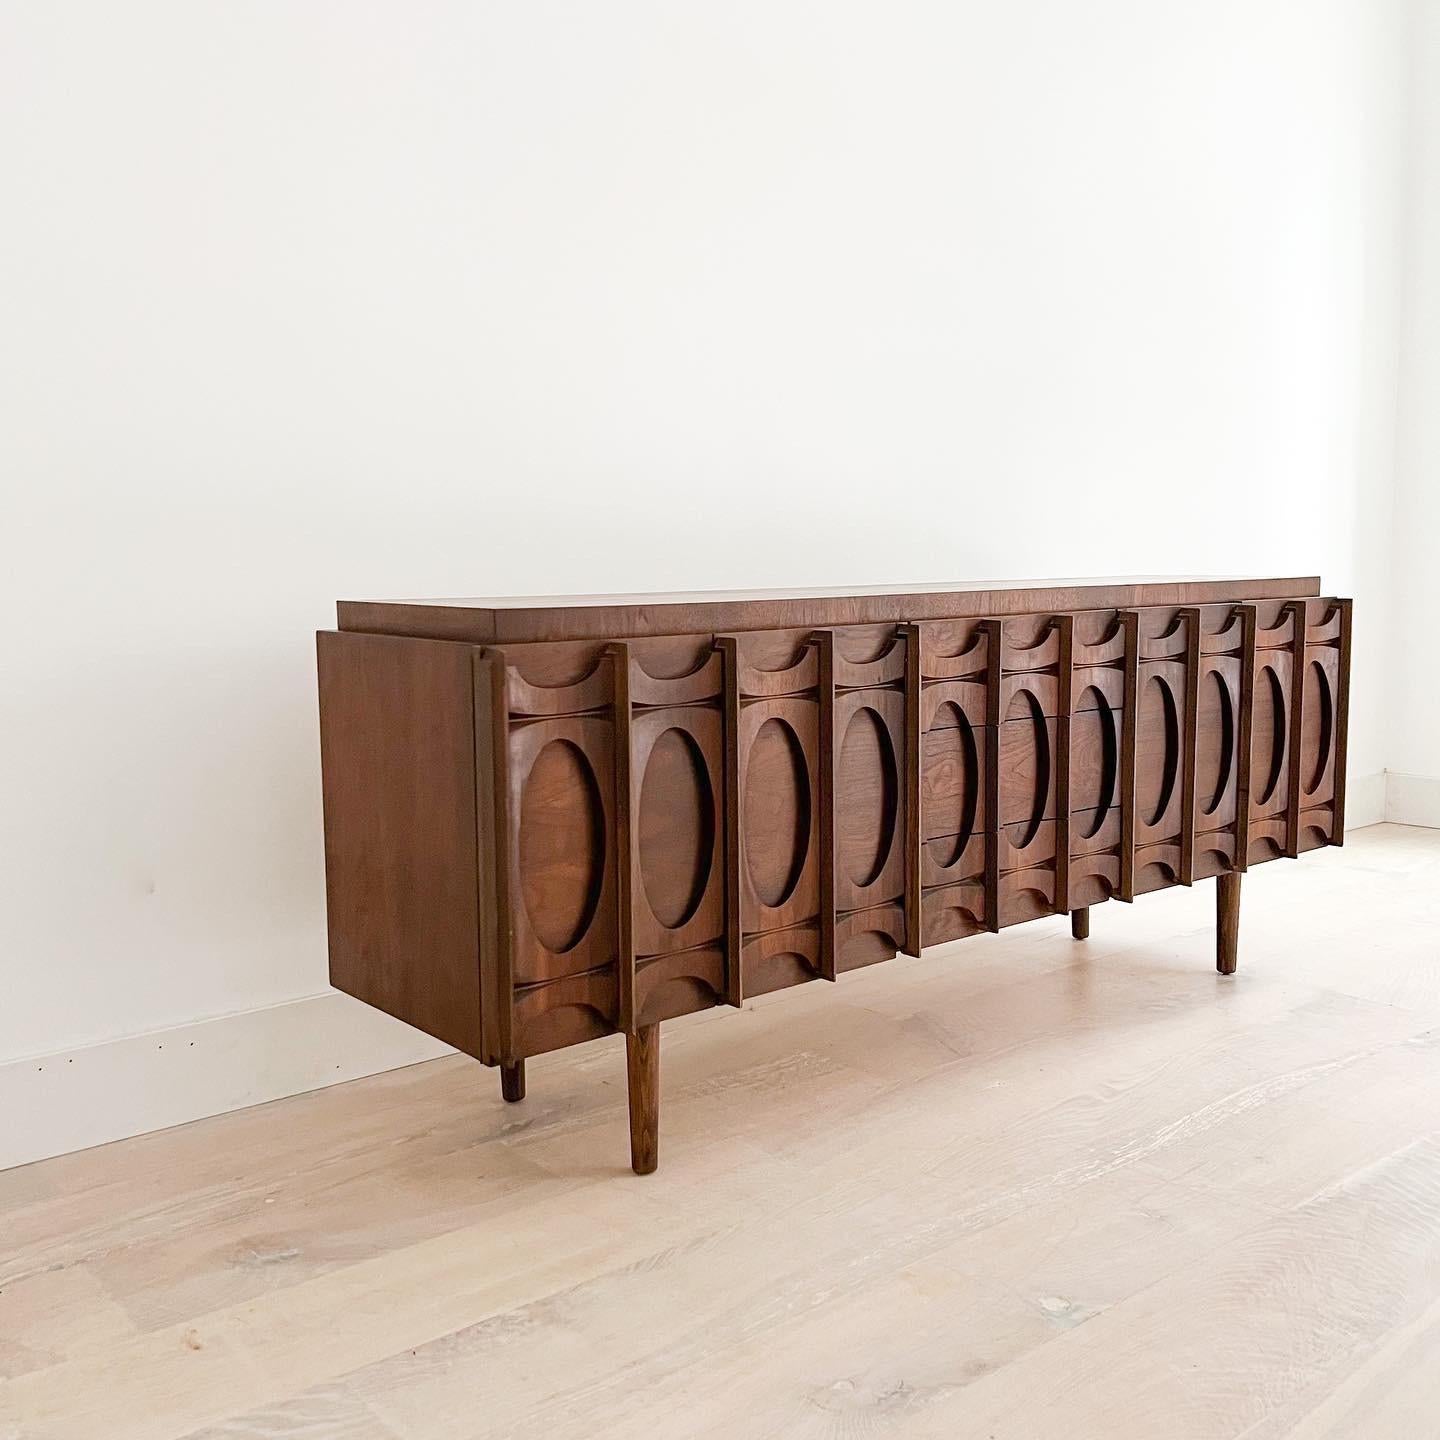 Mid century modern sculpted front walnut credenza on tapered legs by Tobago (made in Canada). The top has been sanded and restored. Some scuffing/scratching/small areas of veneer repair from age appropriate wear. Three middle drawers in the center